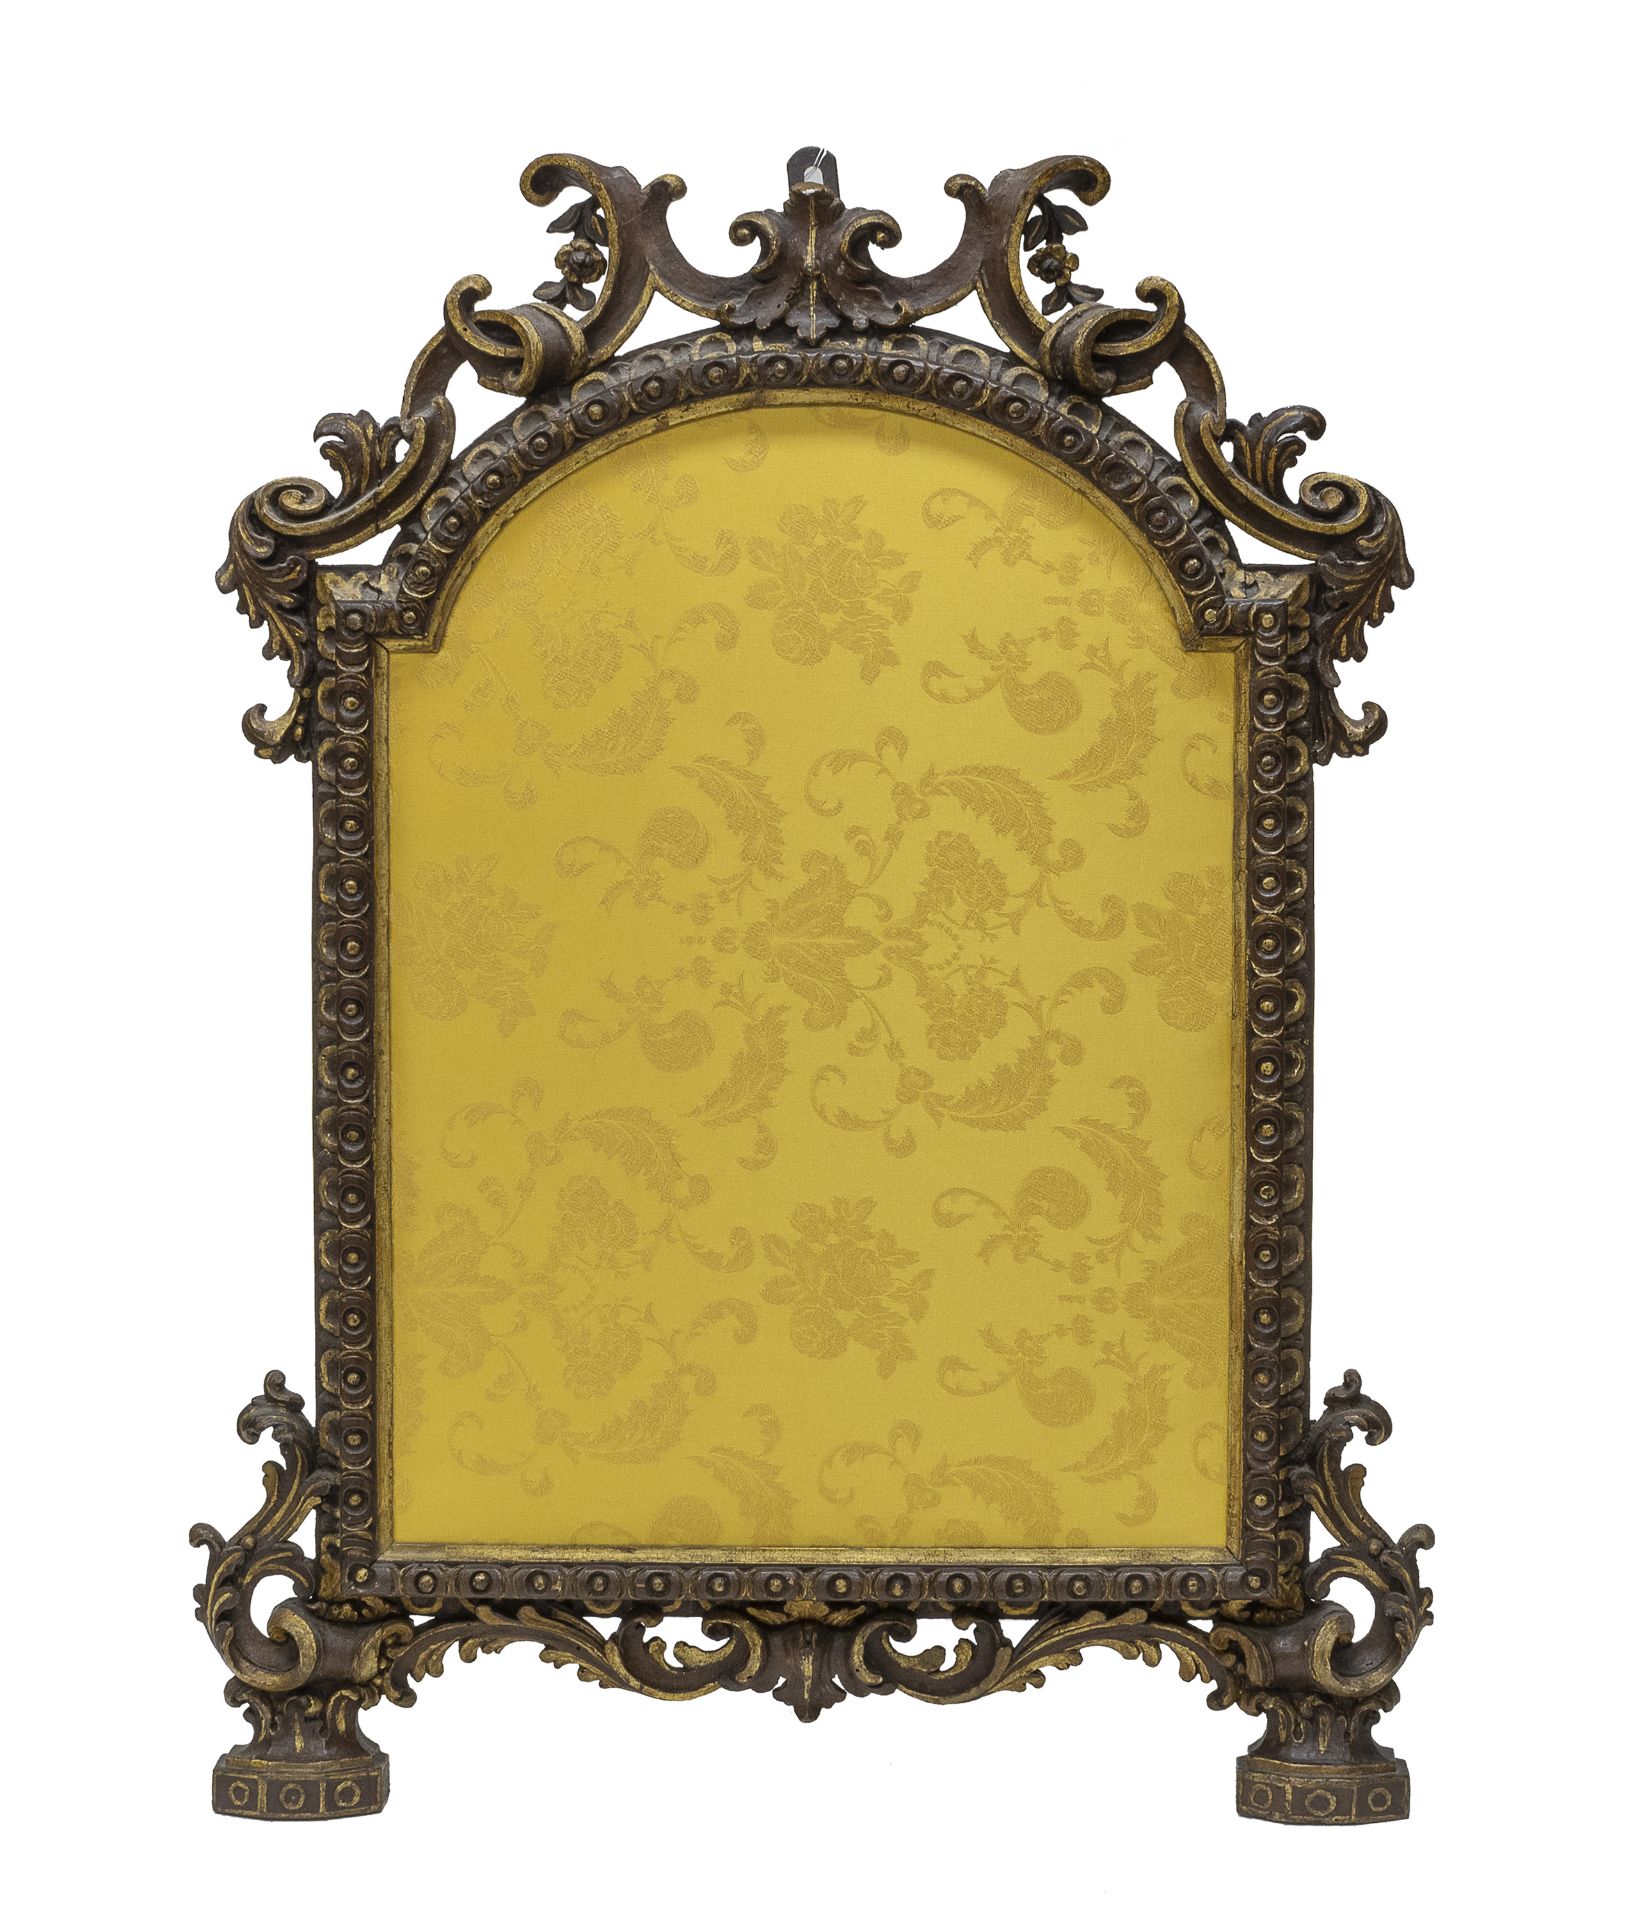 LACQUERED WOOD FRAME CENTRAL ITALY 18TH CENTURY